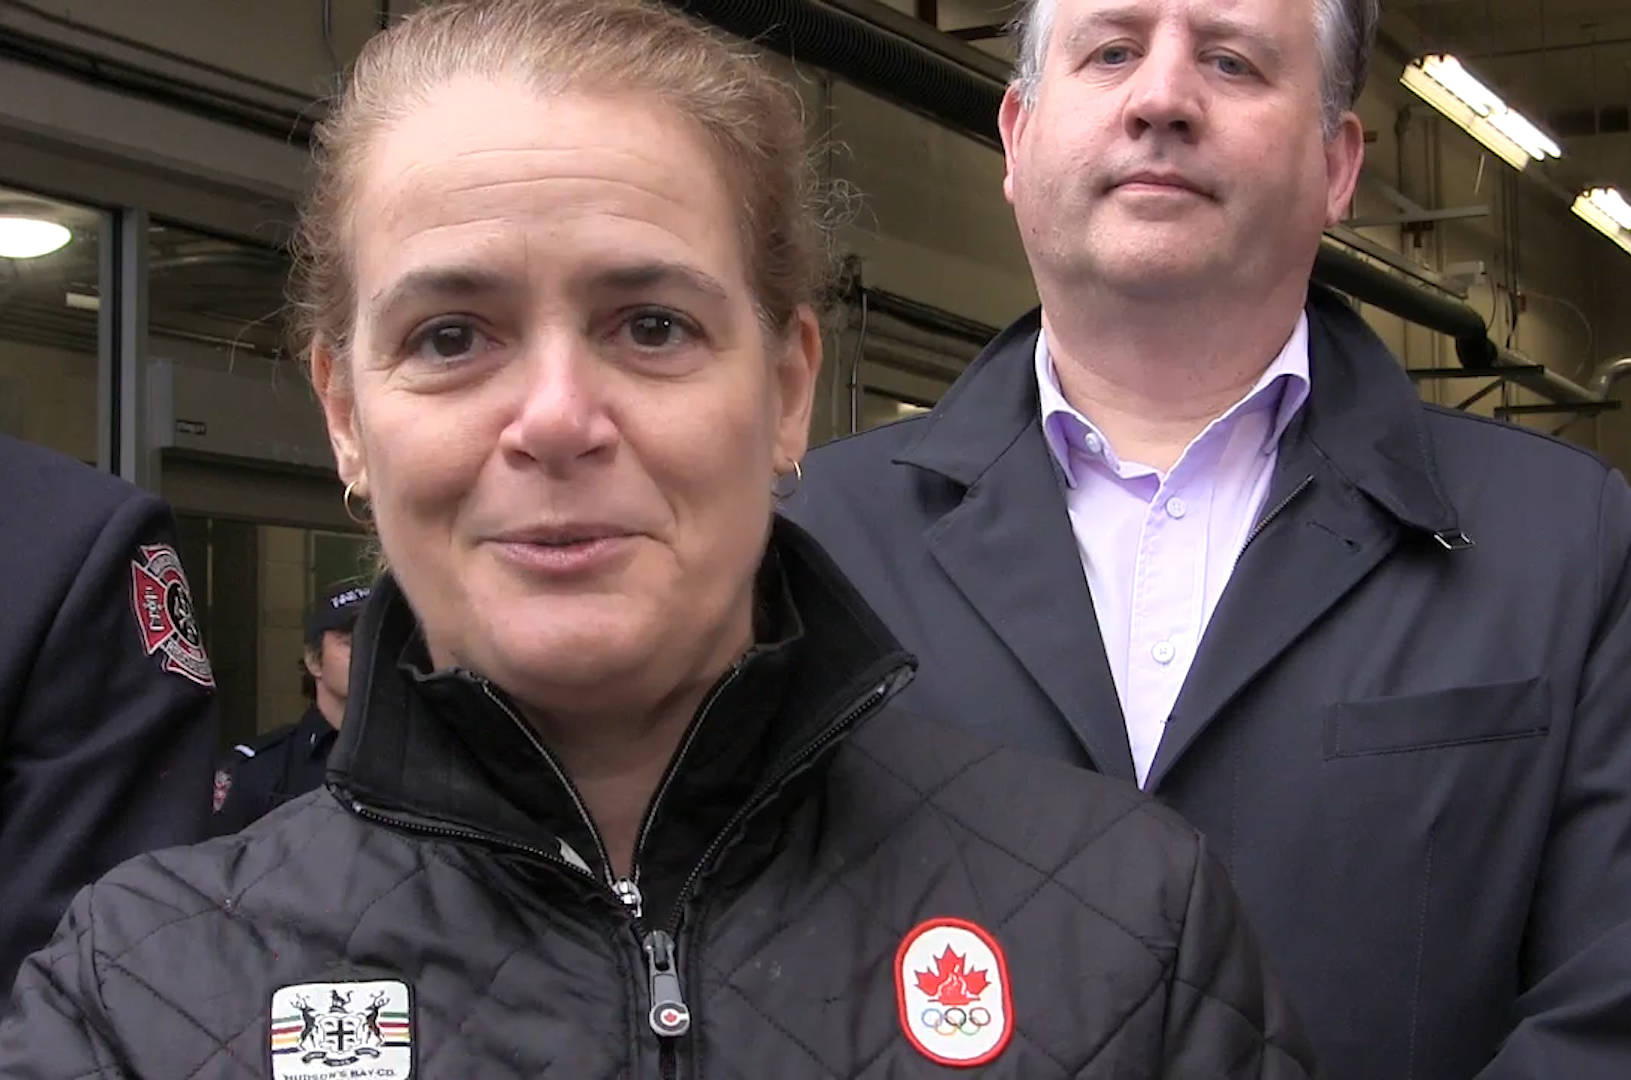 Canada’s Governor General Julie Payette met at a fire hall in downtown Vancouver on Feb. 22, 2020, with firefighters and police officers as well as officials including Mayor Kennedy Stewart. (The Canadian Press photo)